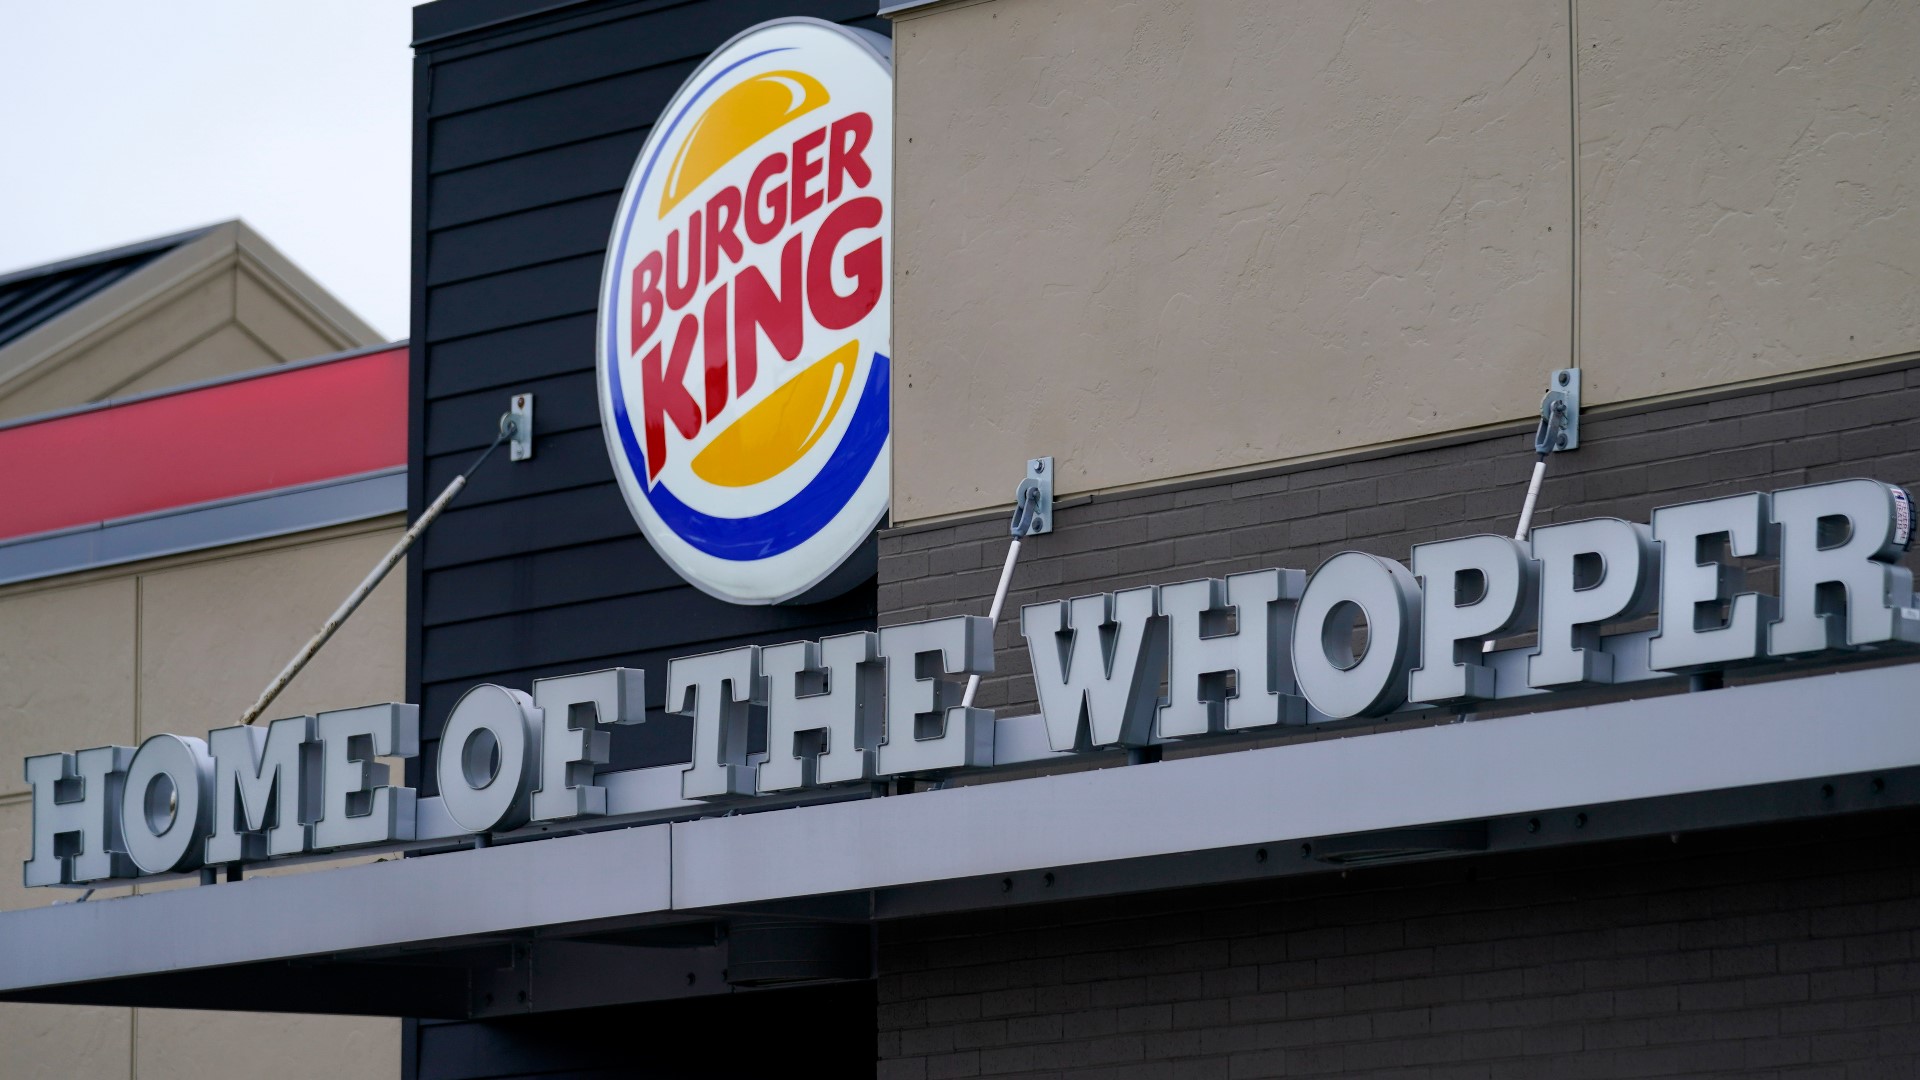 According to the lawsuit, Burger King's Whoppers have gotten much bigger in advertisements, but not in customers' bags.